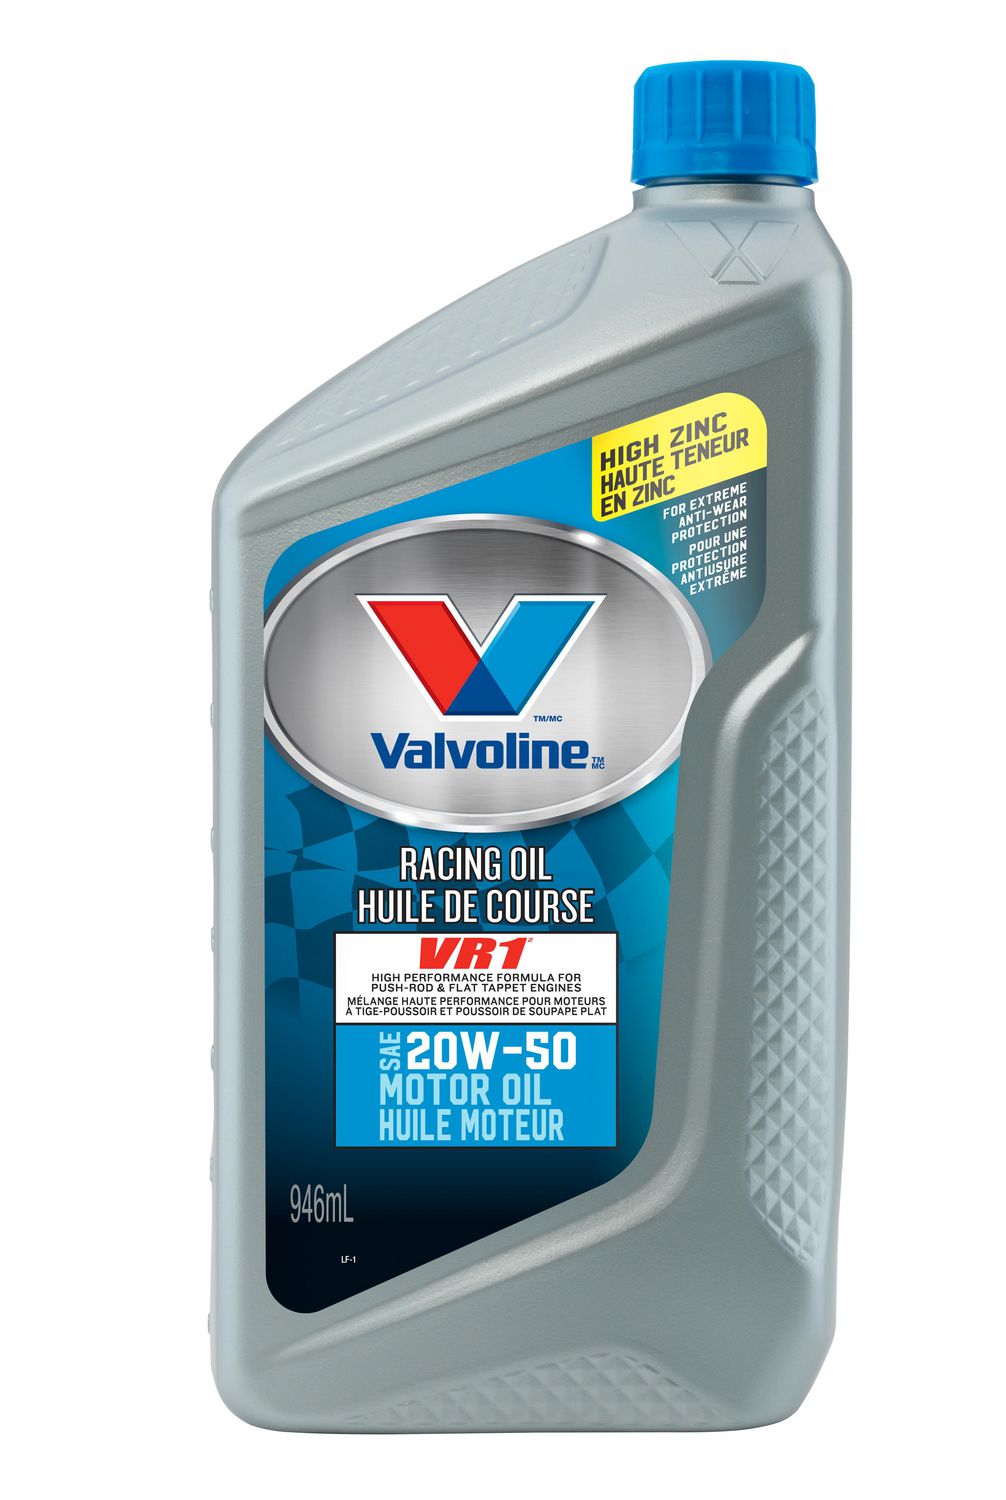 Does Valvoline Have Gift Cards